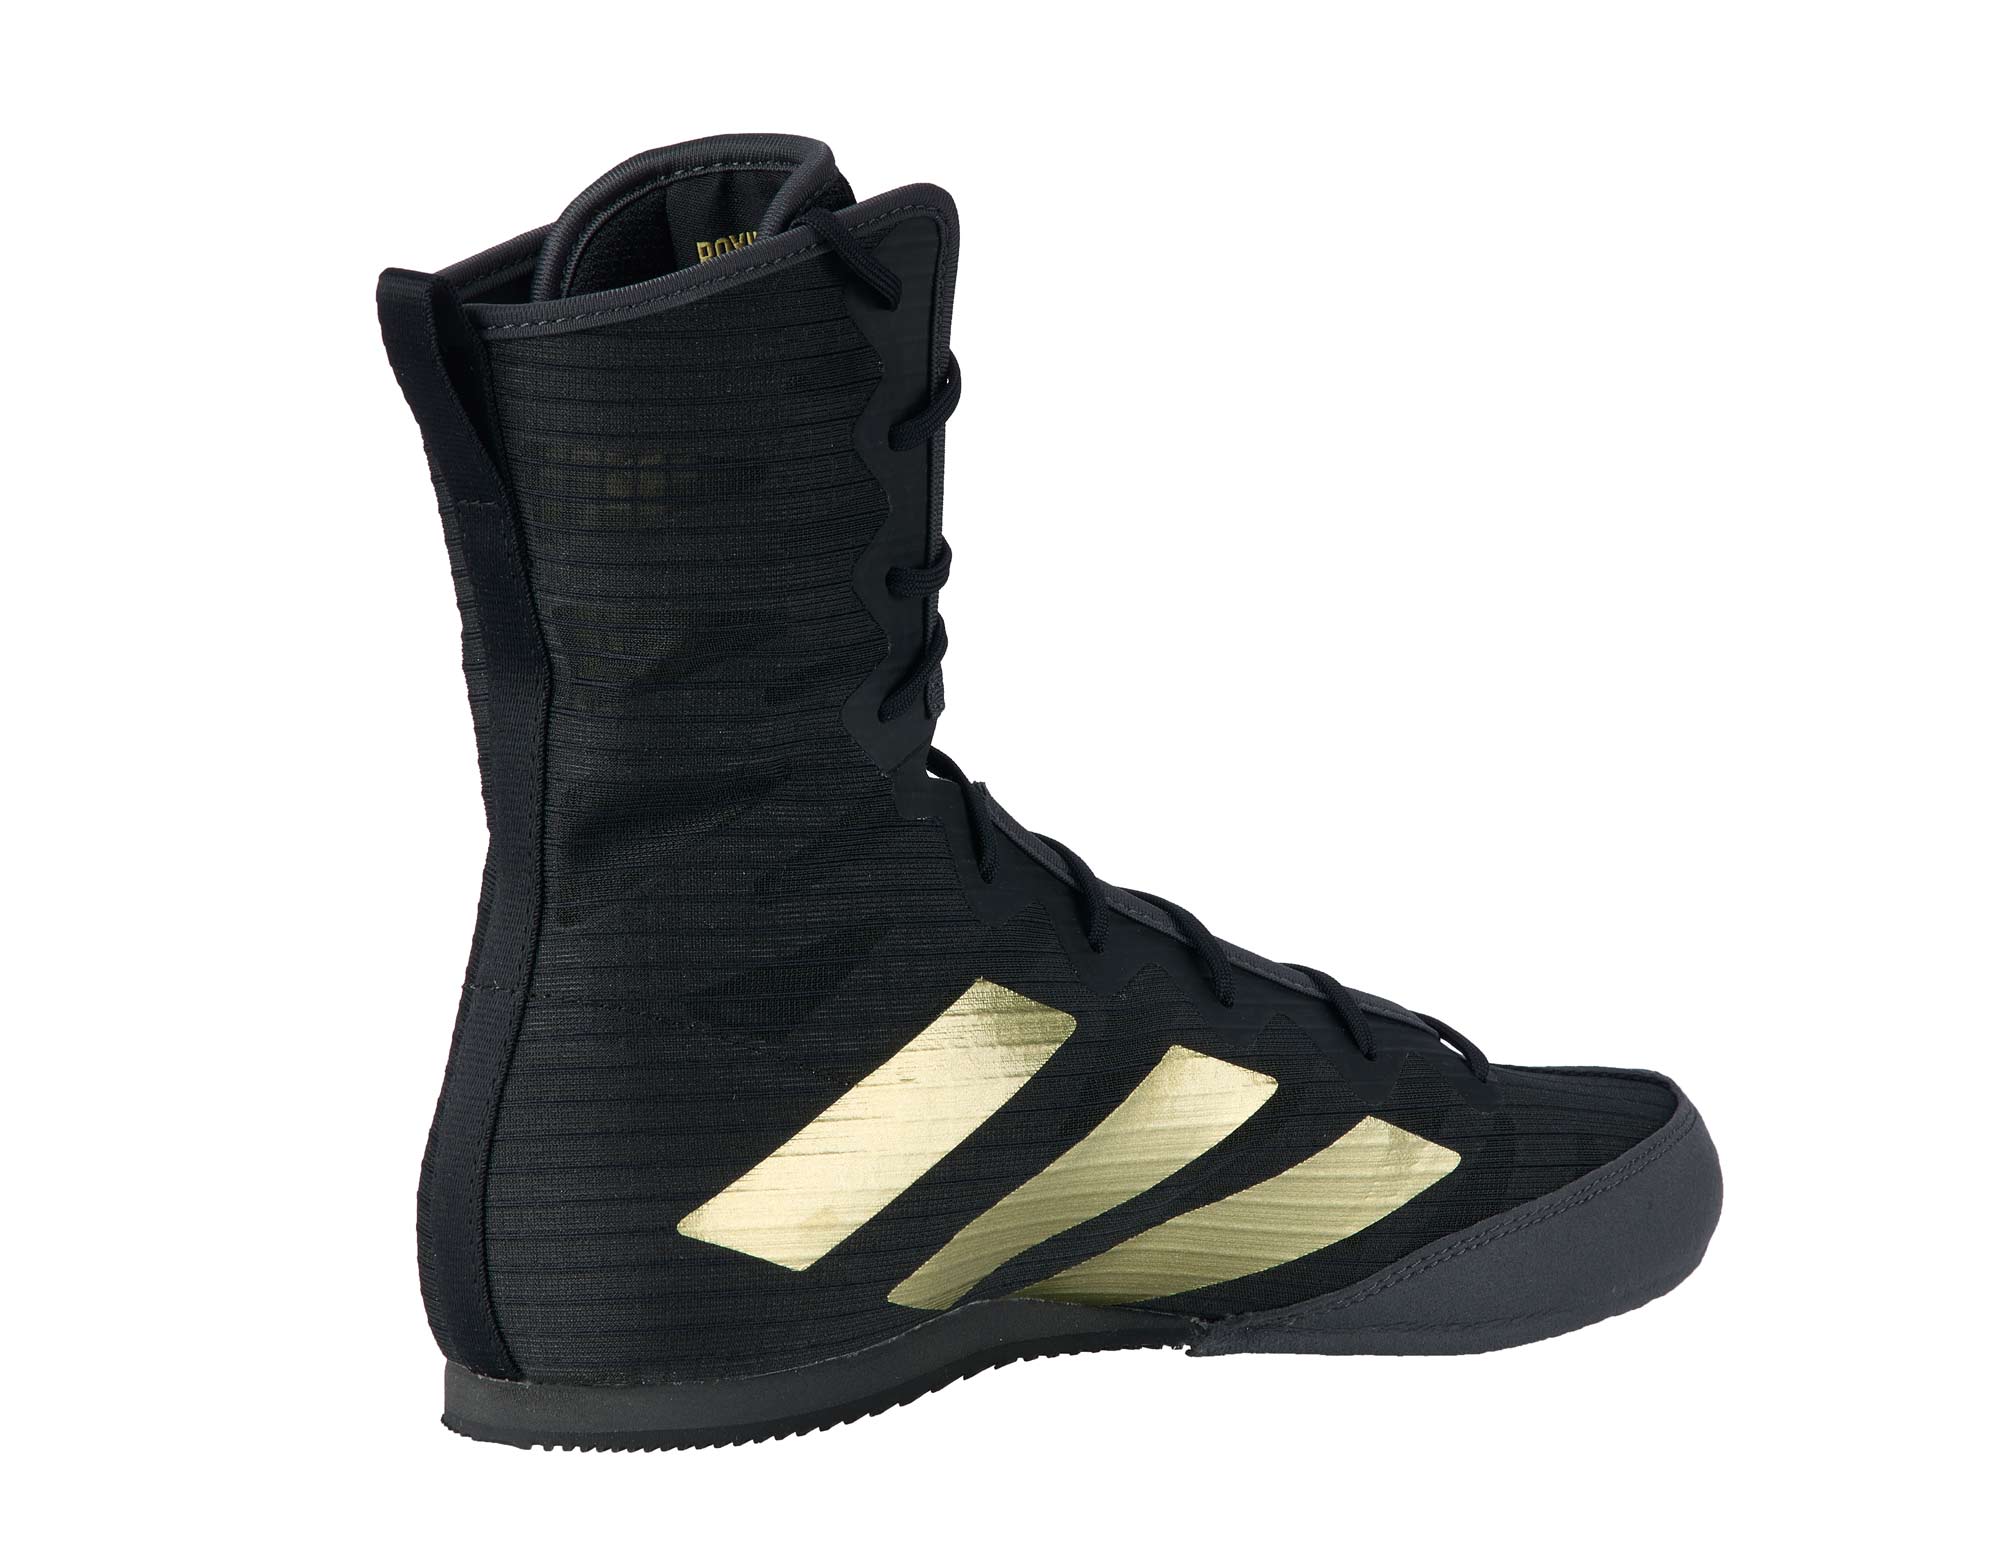 Adidas Box Hog 4 Boxing Shoes Black/Gold - Agile Footwork with Cushioned Comfort, GZ6116